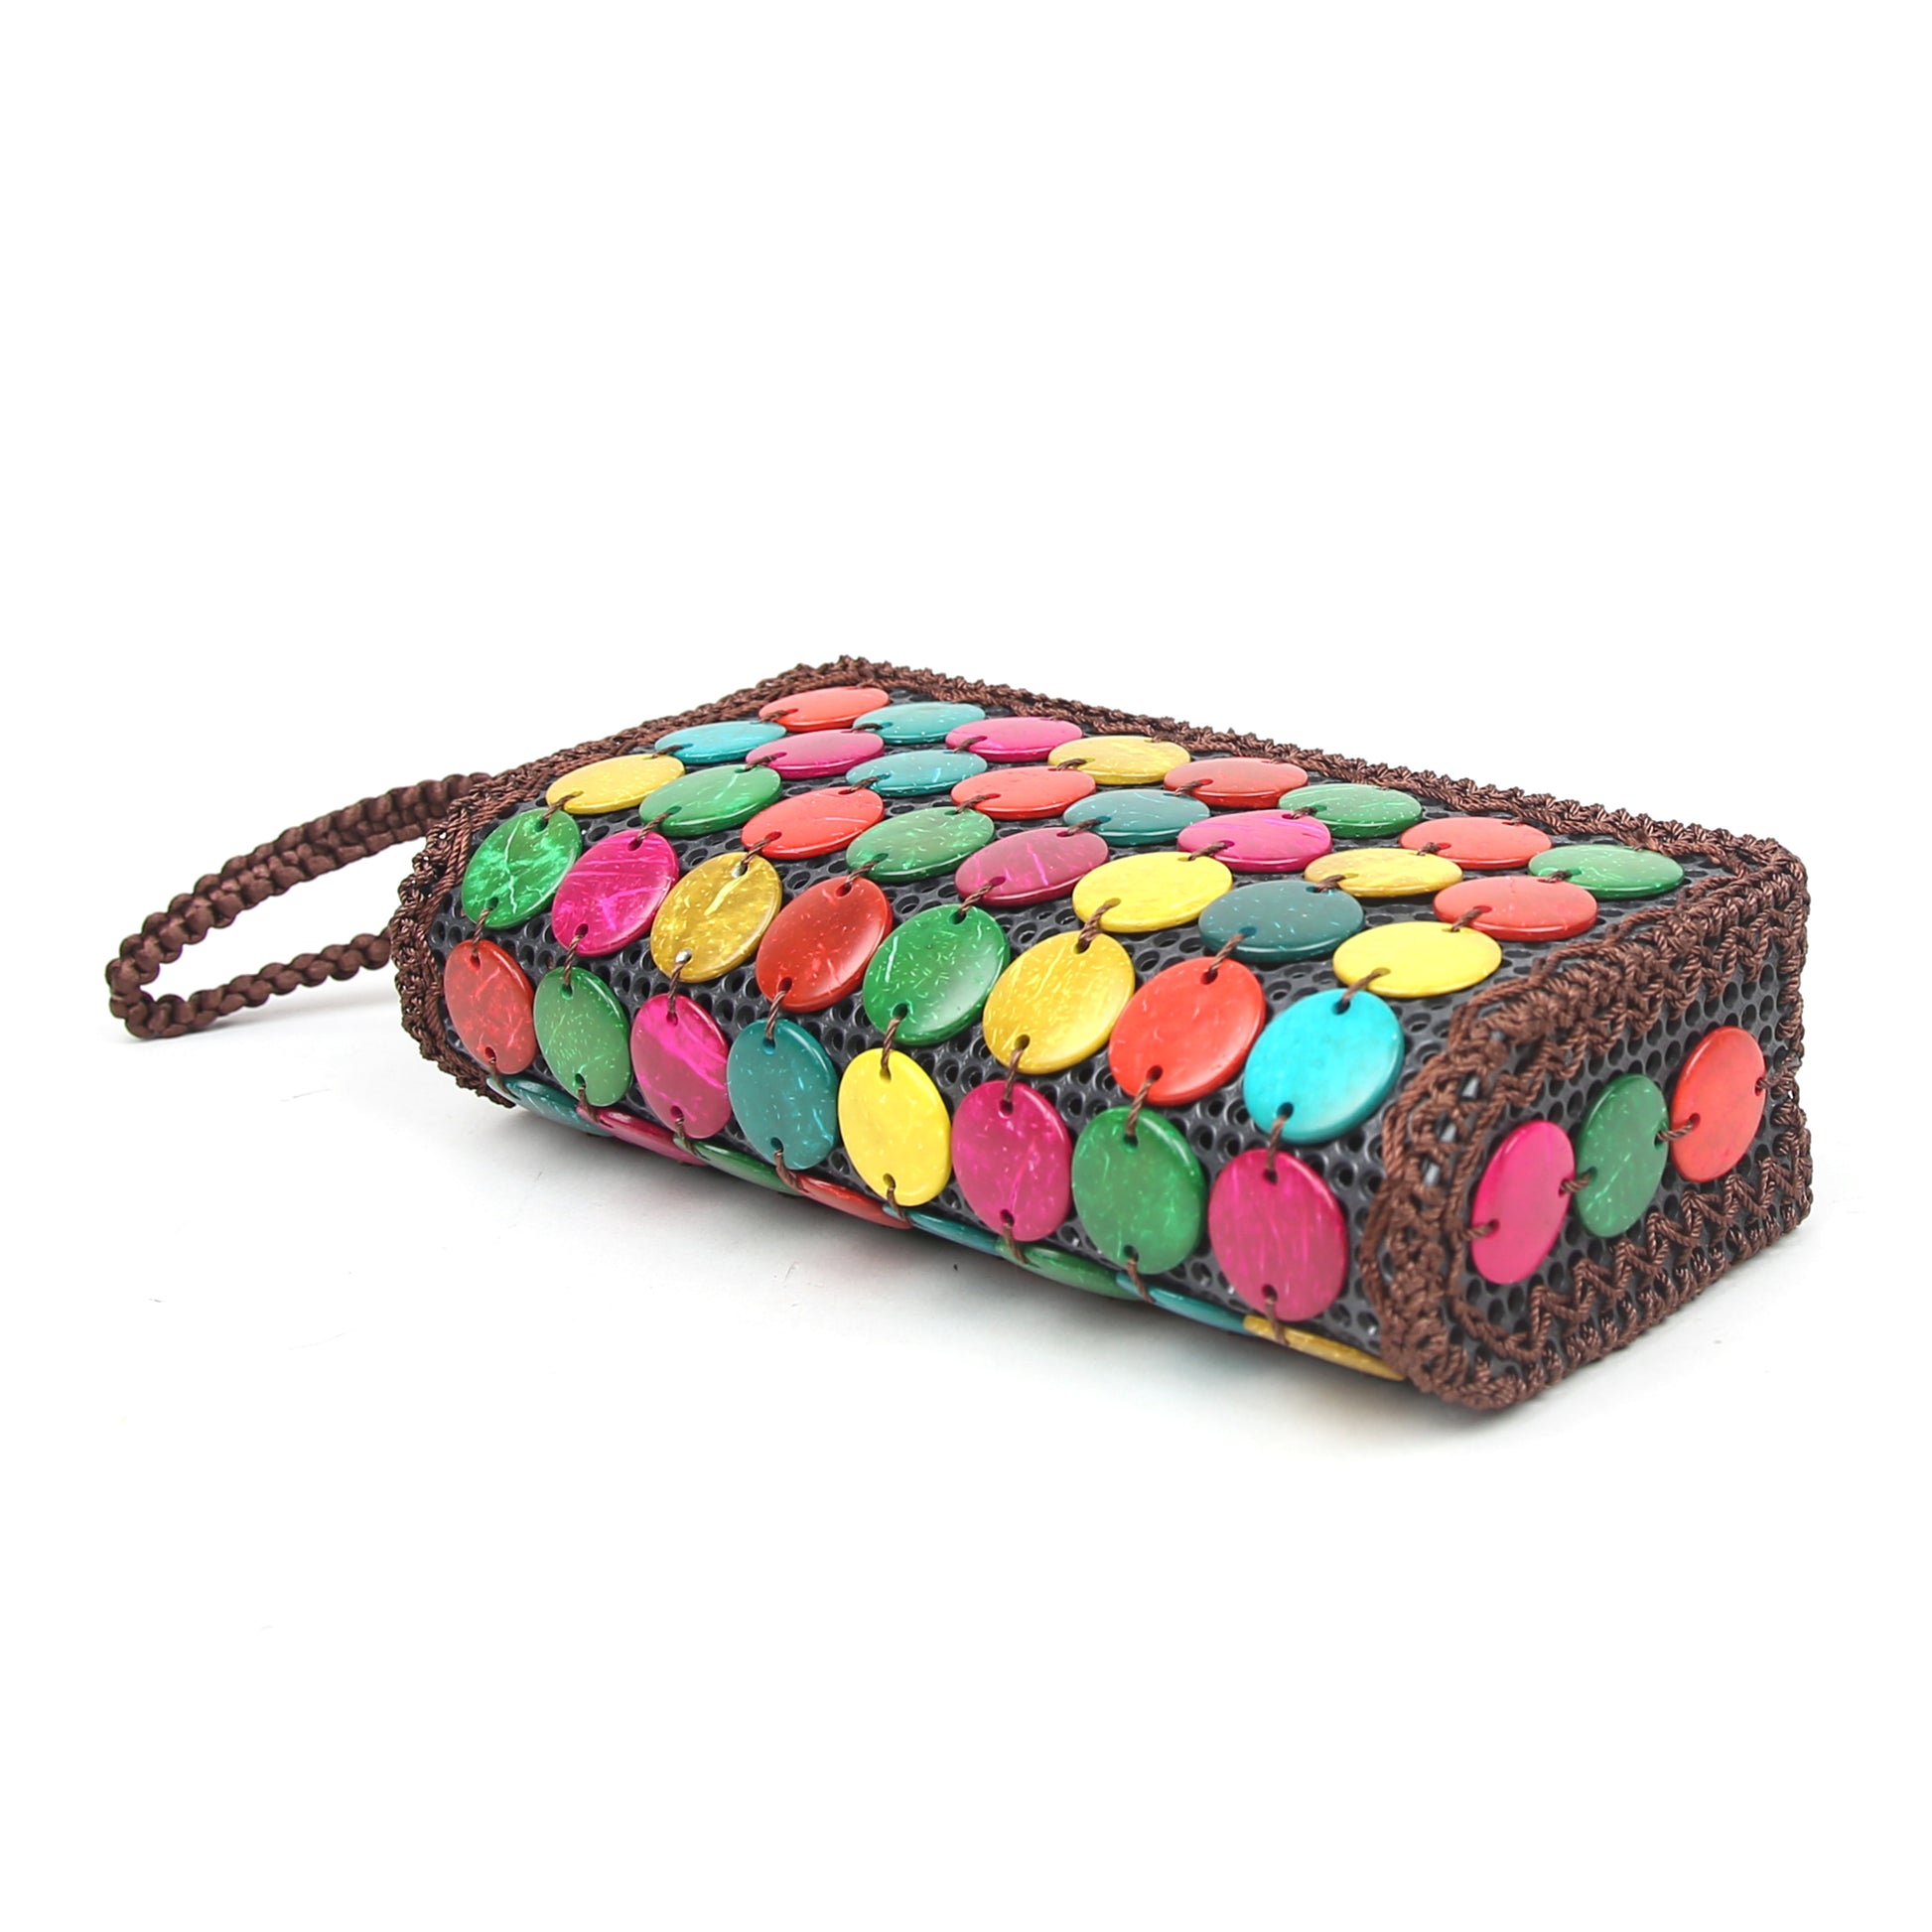 DAISYLIFE Natural, Eco-friendly and spacious colorful Coconut Shell Clutch Purse Bag for everyday use 